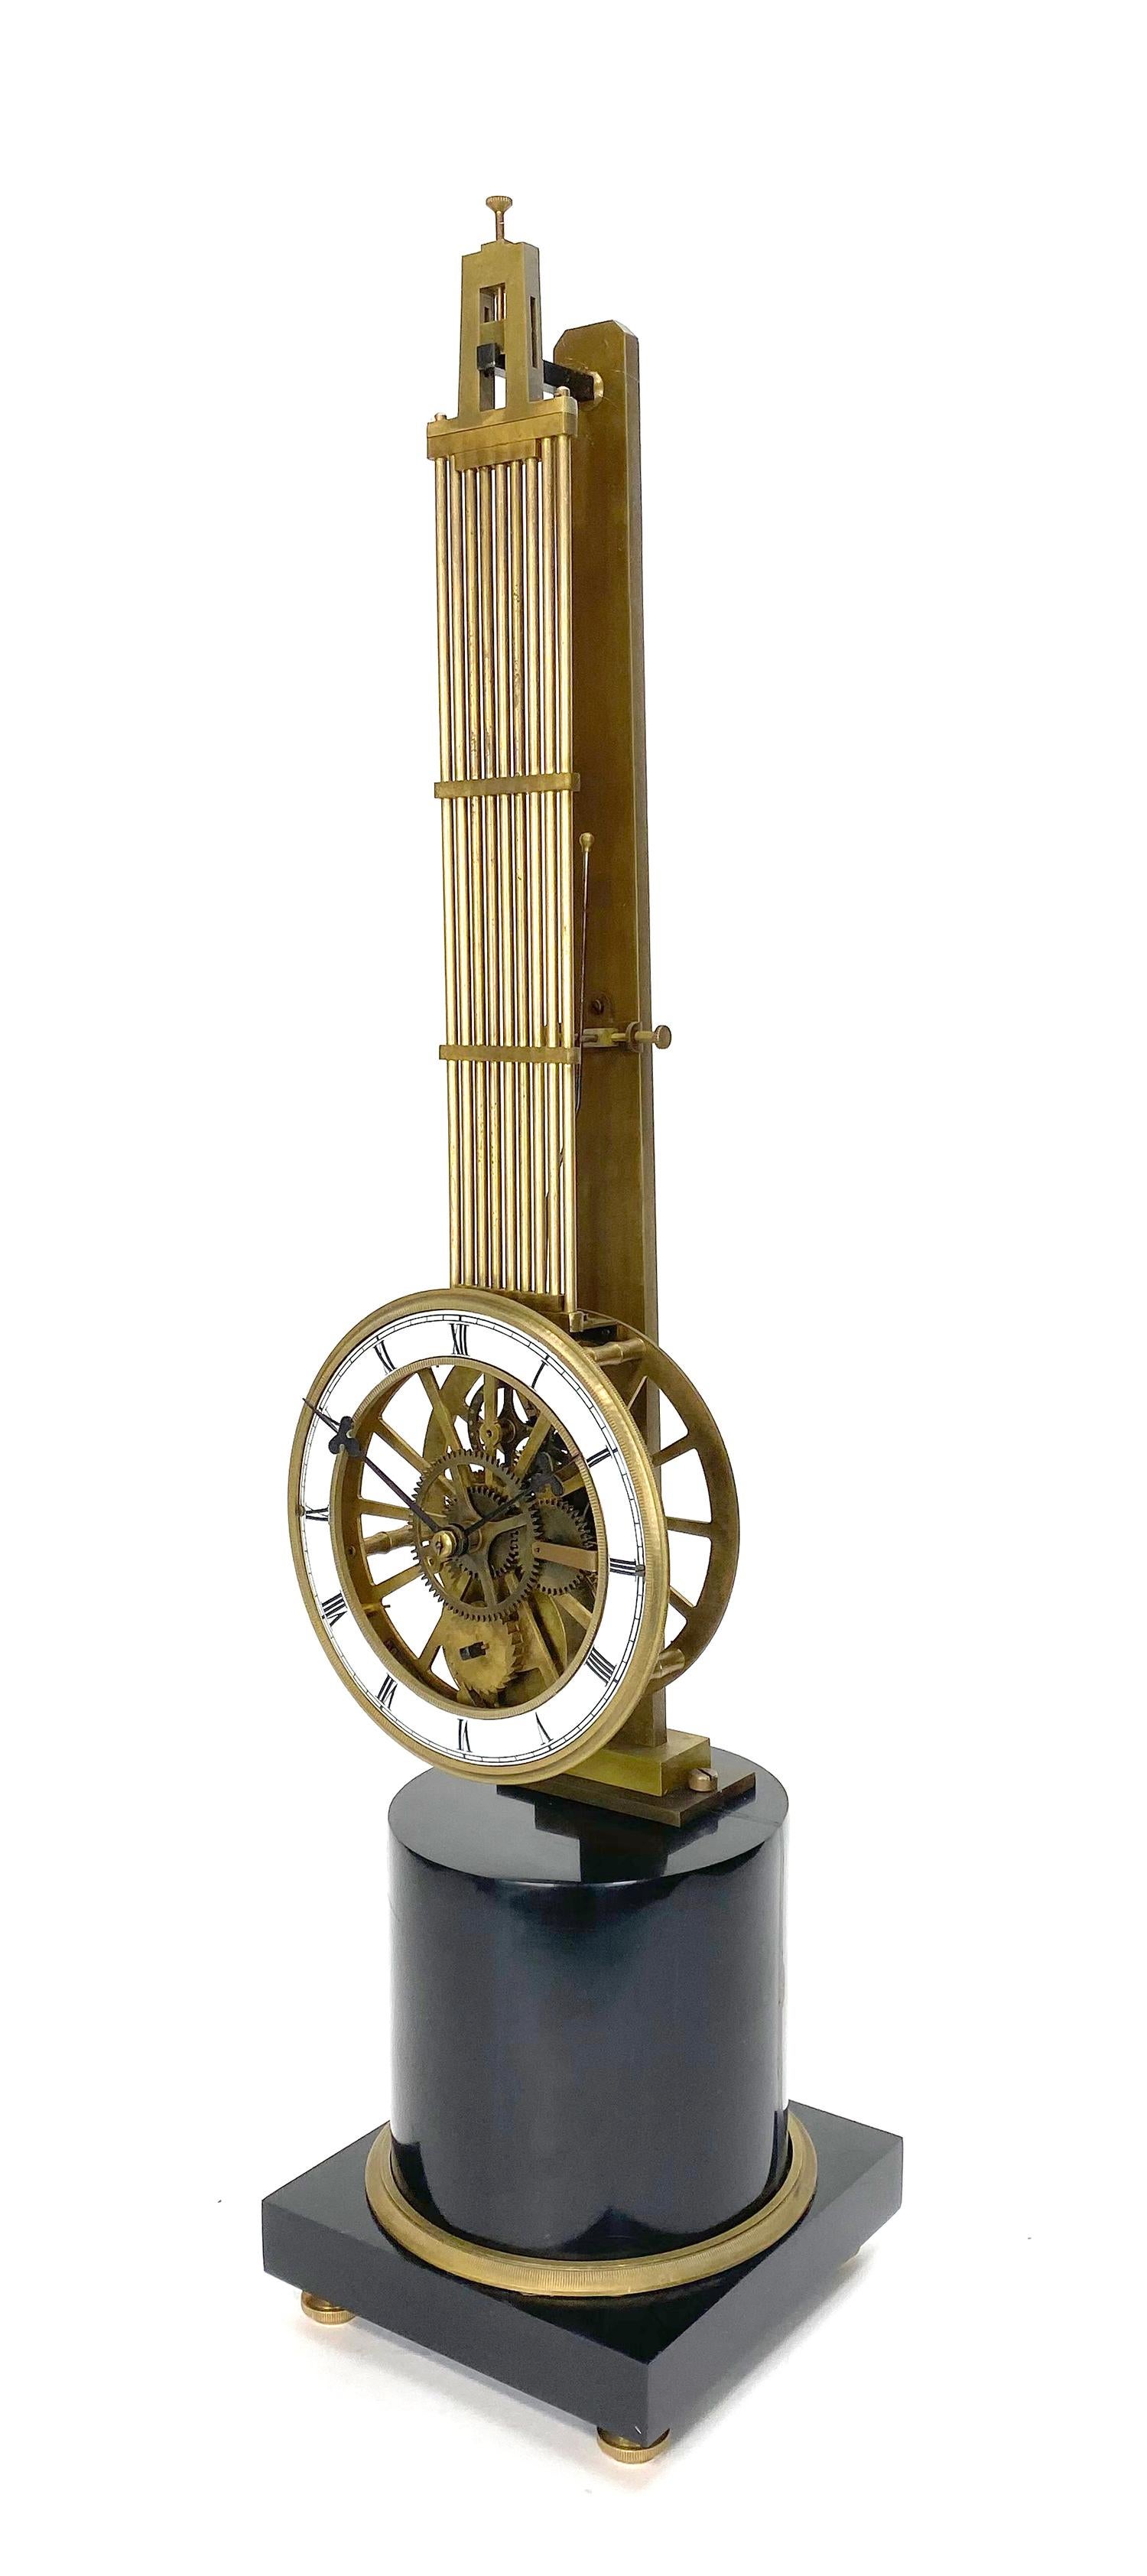 Mystery pinwheel upside down skeleton swinging clock with marble base.

Here is a very nice looking French style mystery upside down swinging clock. It's in brushed bras with a black marble base. It stands 19-1/2